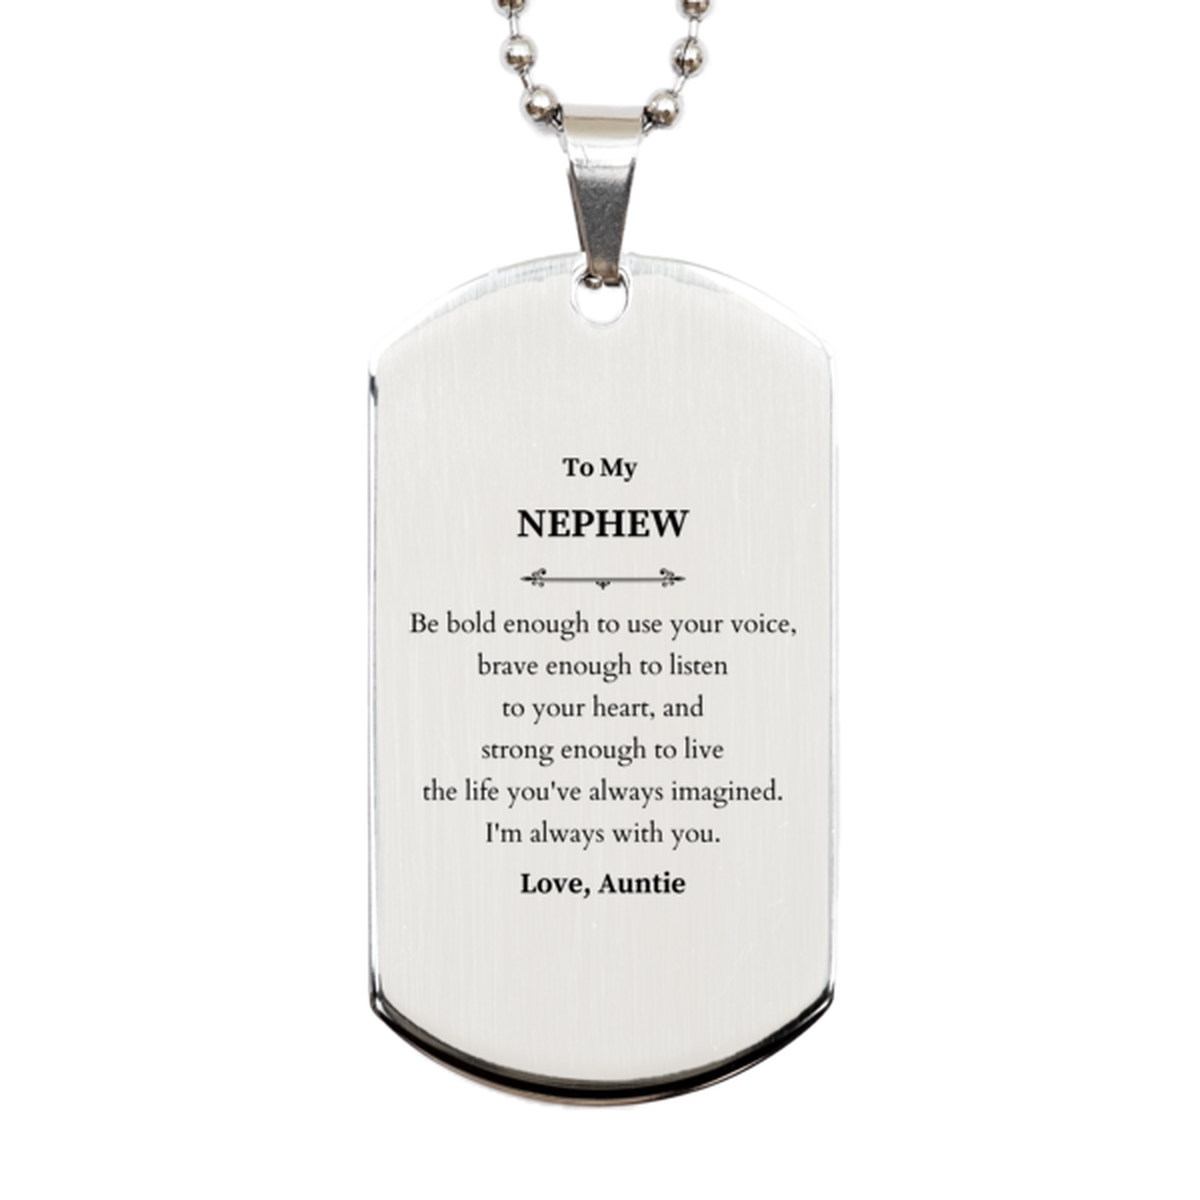 Keepsake Nephew Silver Dog Tag Gift Idea Graduation Christmas Birthday Nephew from Auntie, Nephew Be bold enough to use your voice, brave enough to listen to your heart. Love, Auntie